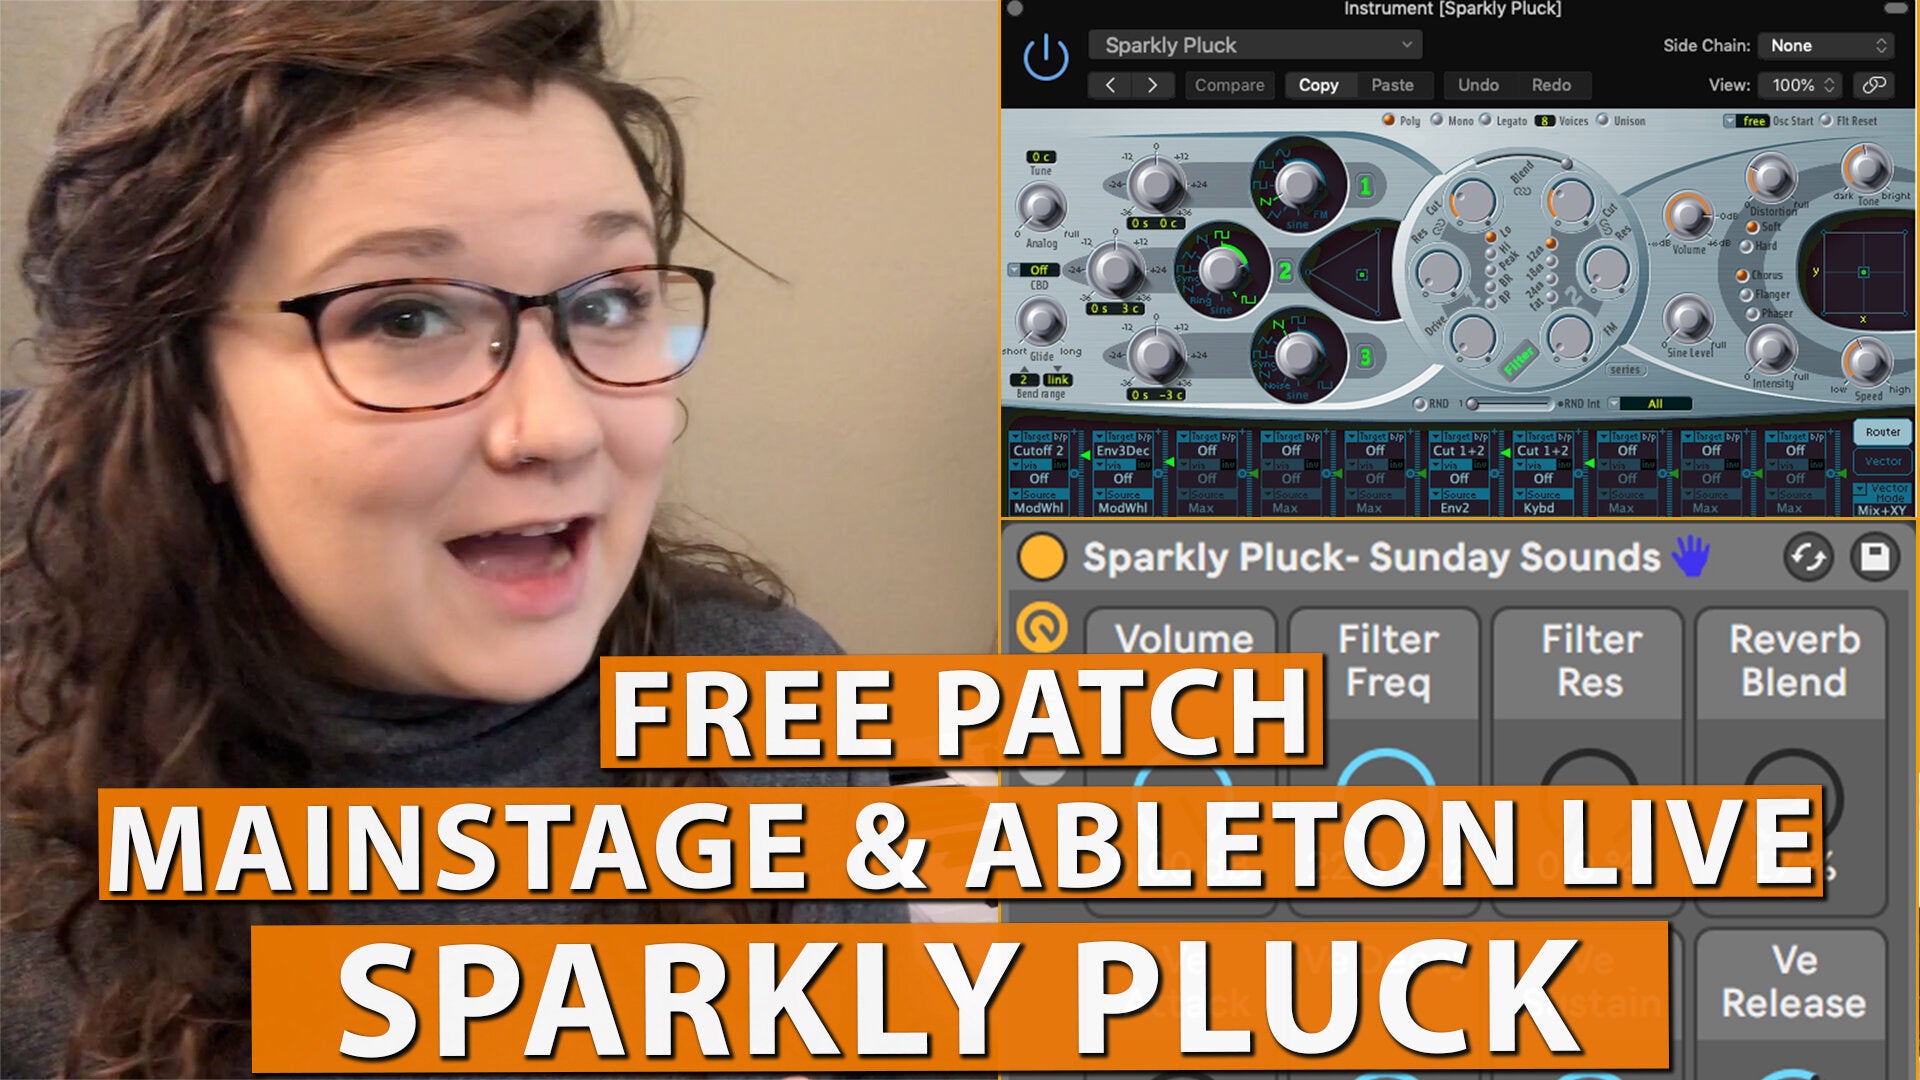 Free MainStage & Ableton Worship Patch! - Sparkly Pluck